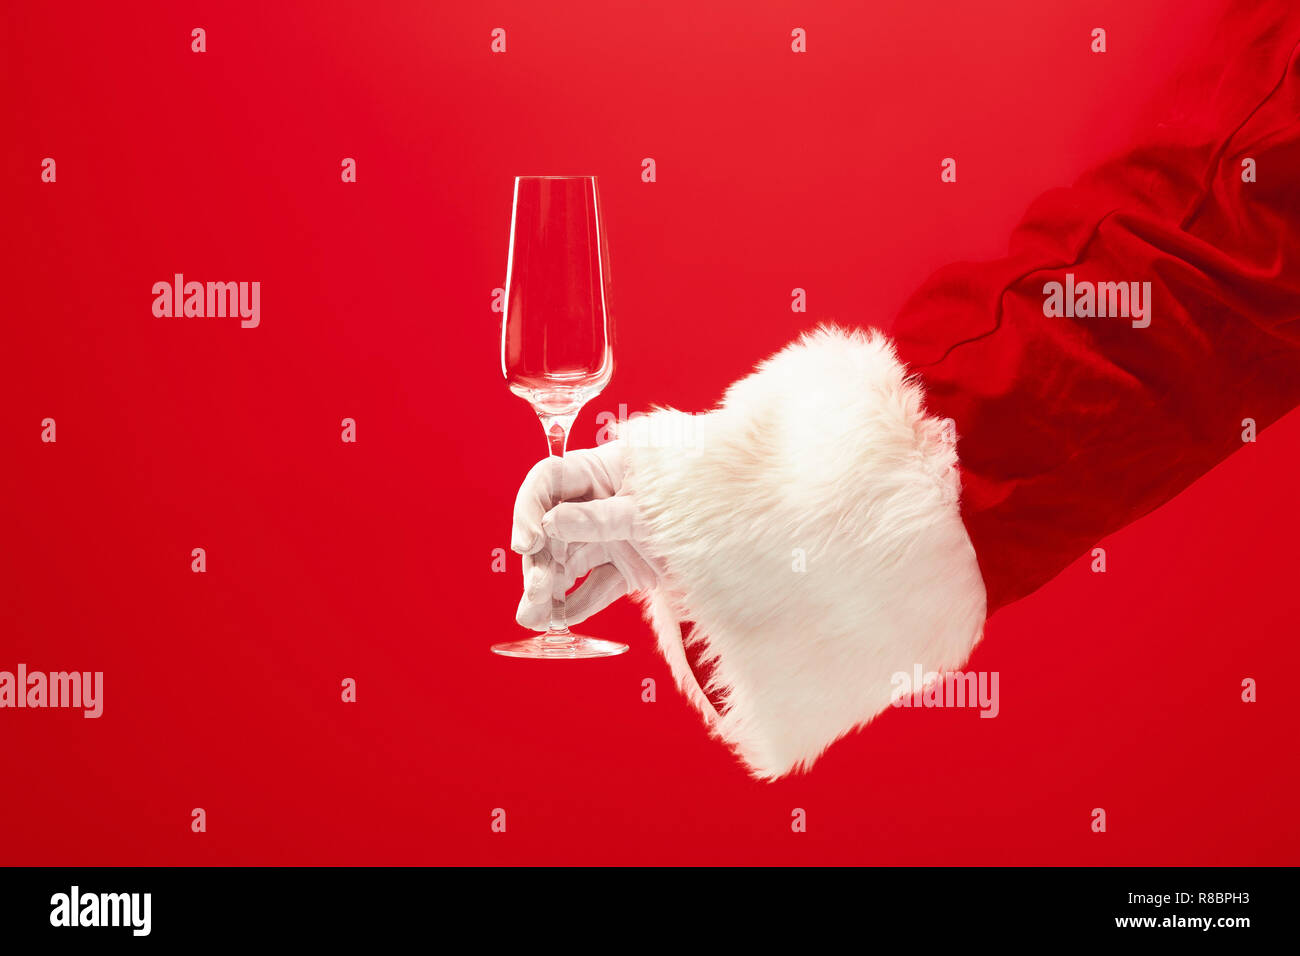 Santa Holding Champagne wineglass over red background. The season, winter, holiday, celebration, gift concept Stock Photo